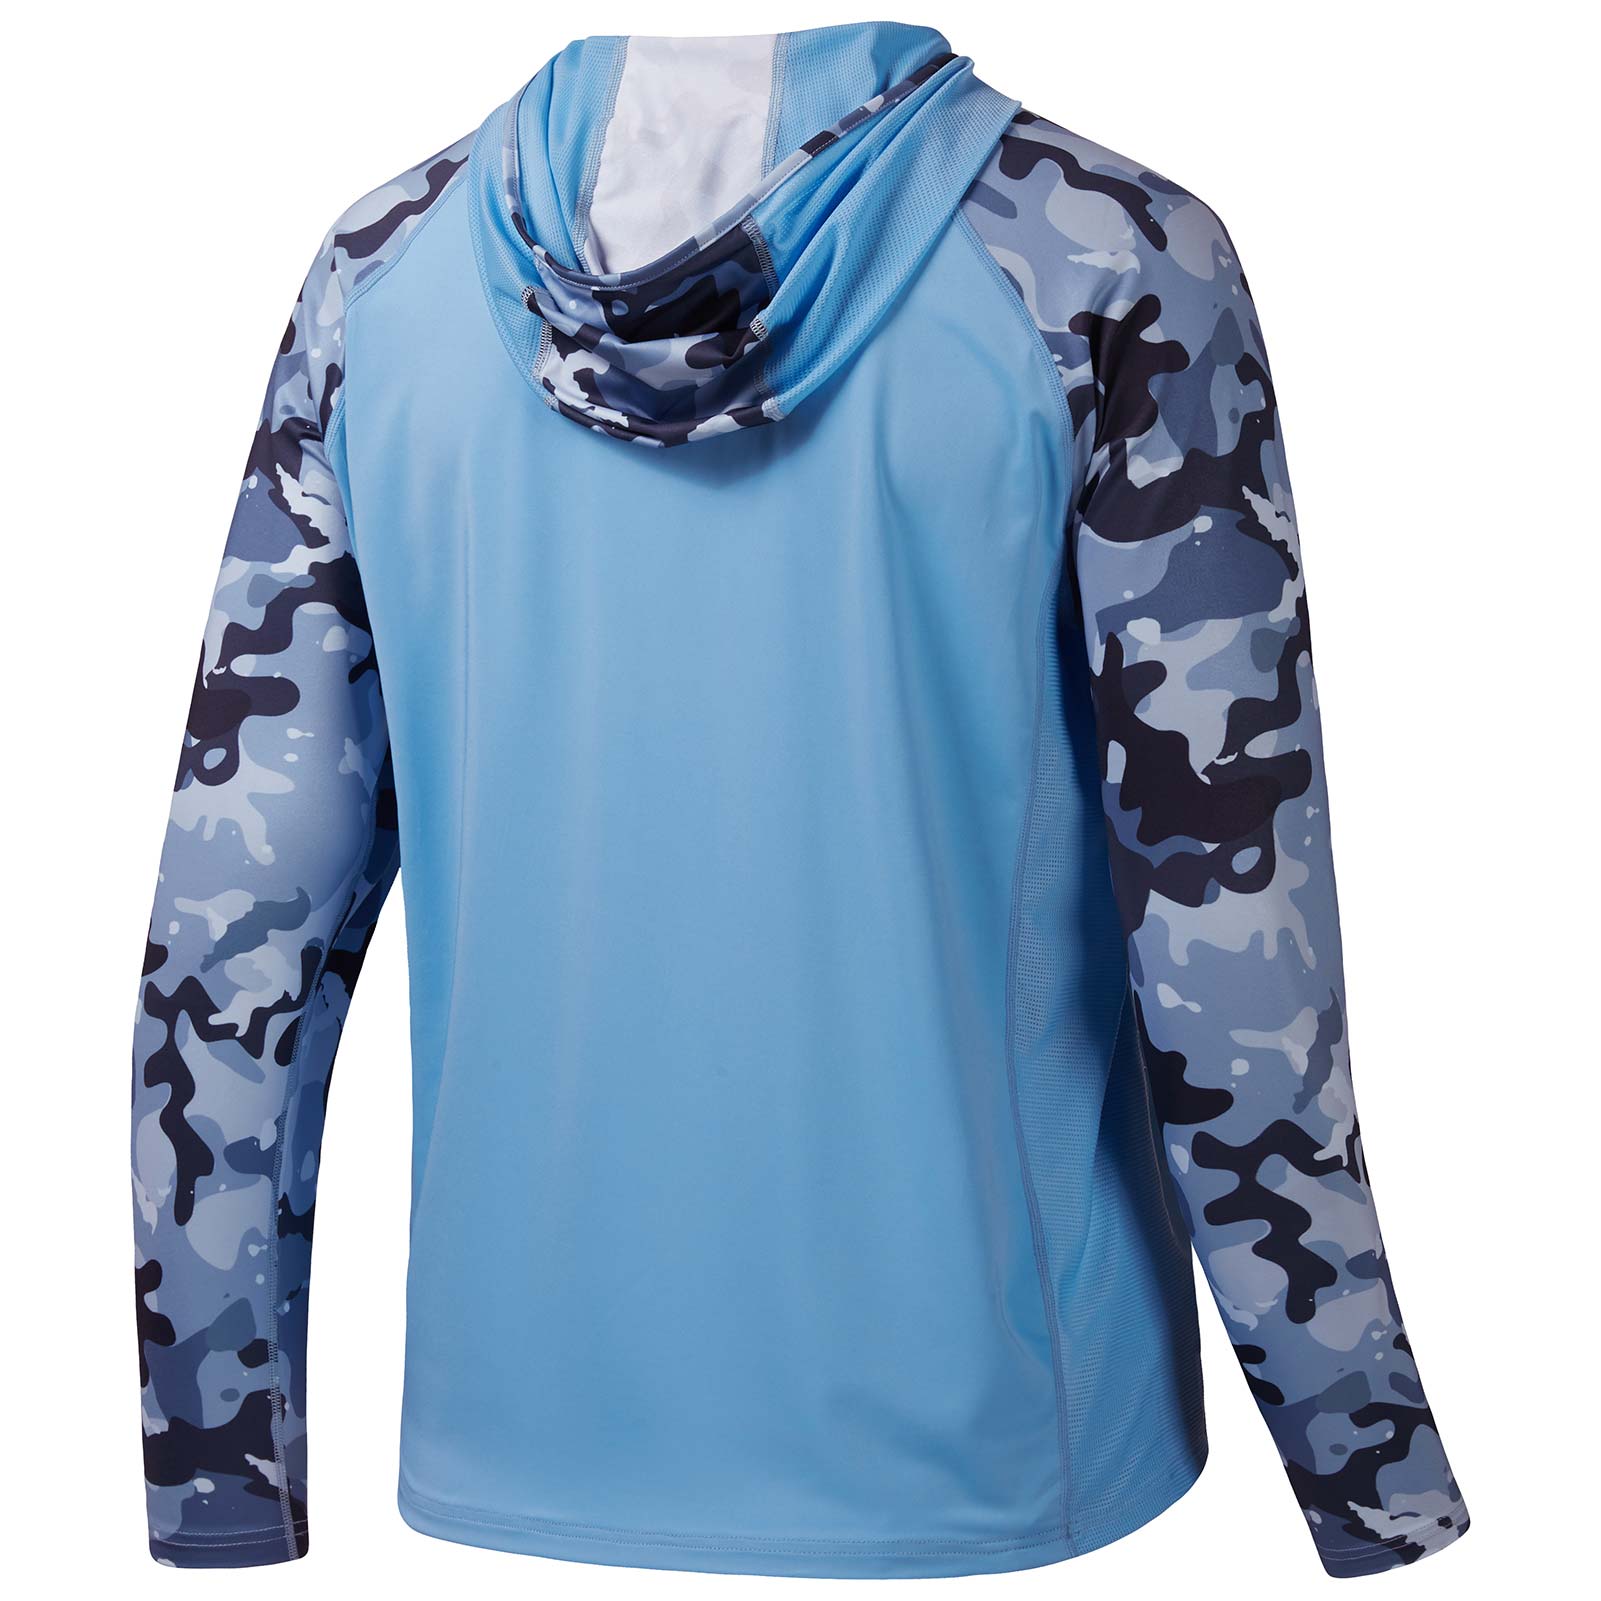 BASSDASH Women's Fishing Hoodie Shirt with Face Mask Thumb Holes UPF 50+  FS23W : Buy Online at Best Price in KSA - Souq is now : Fashion